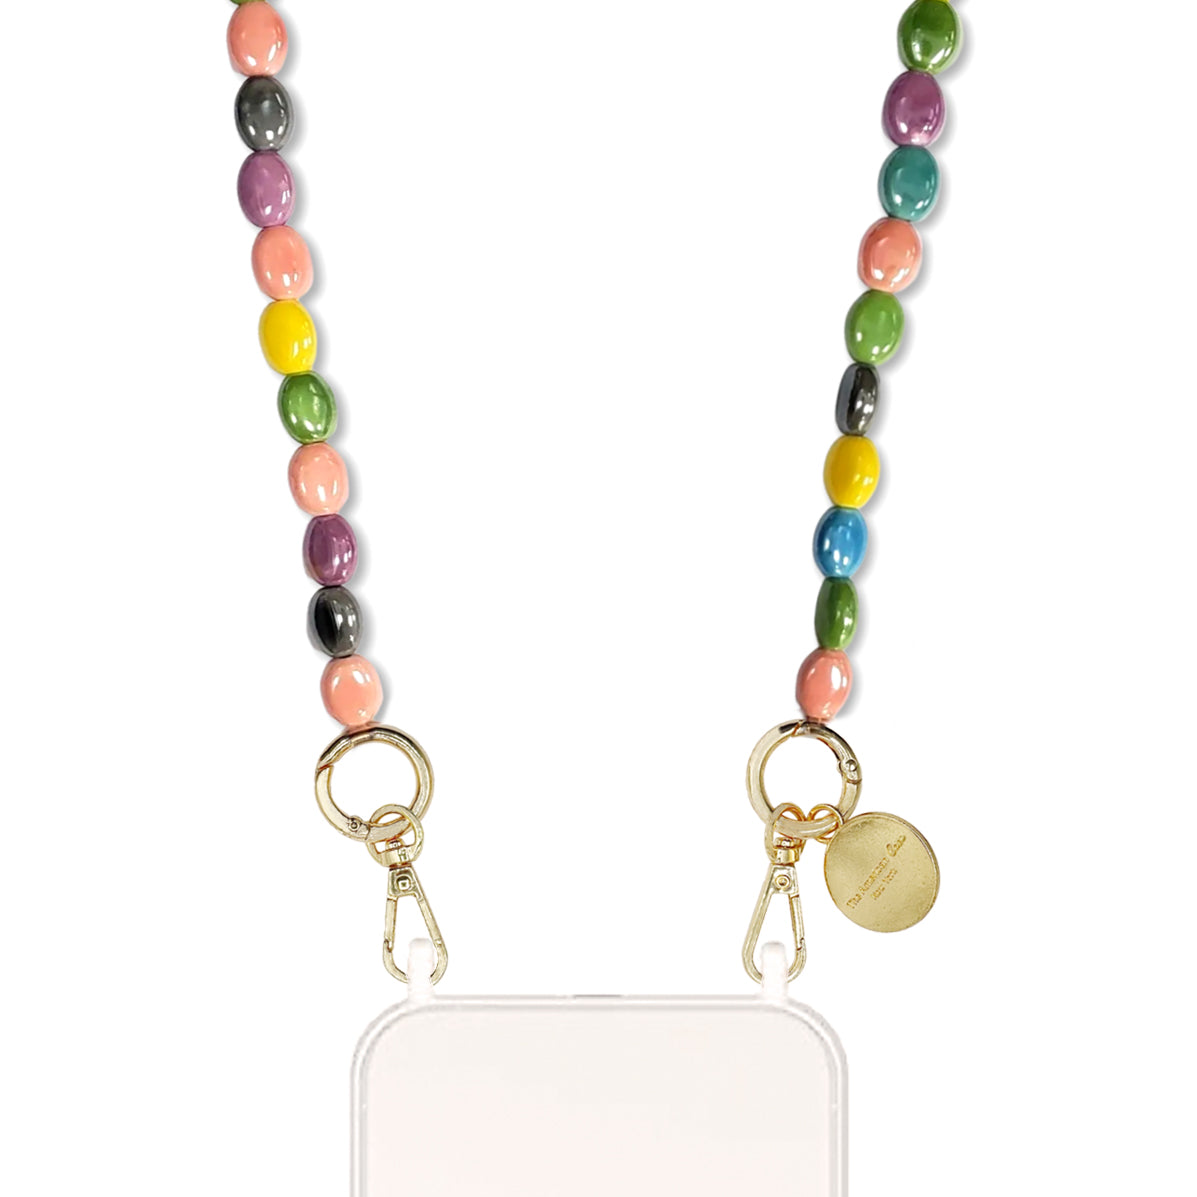 Drew - Colored Bead Chain with Golden Carabiners